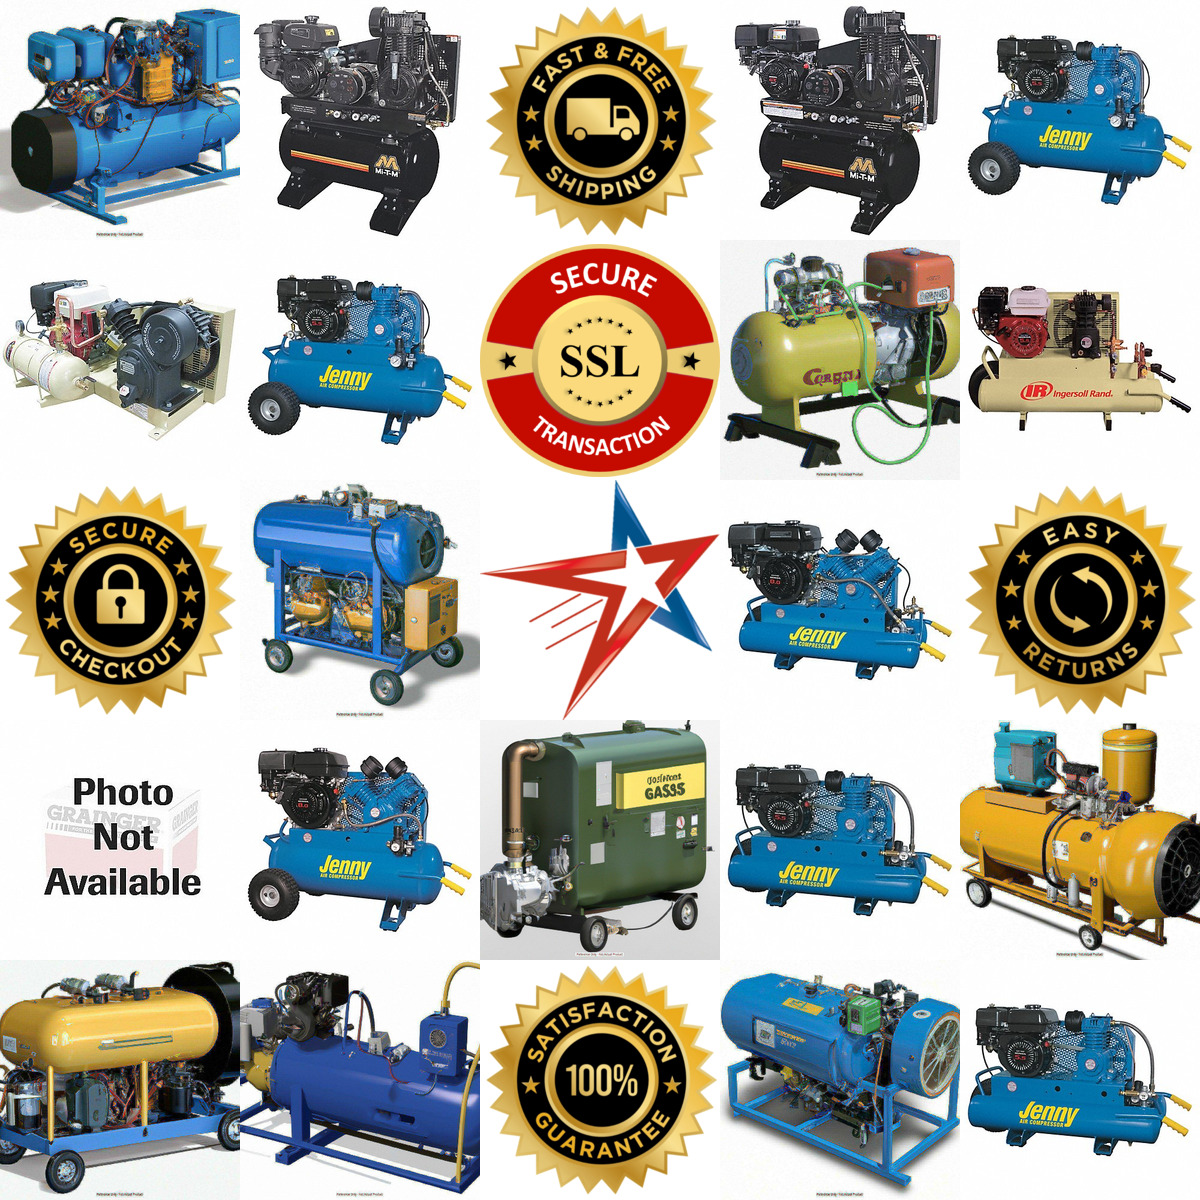 A selection of Portable Gas Engine Air Compressors products on GoVets